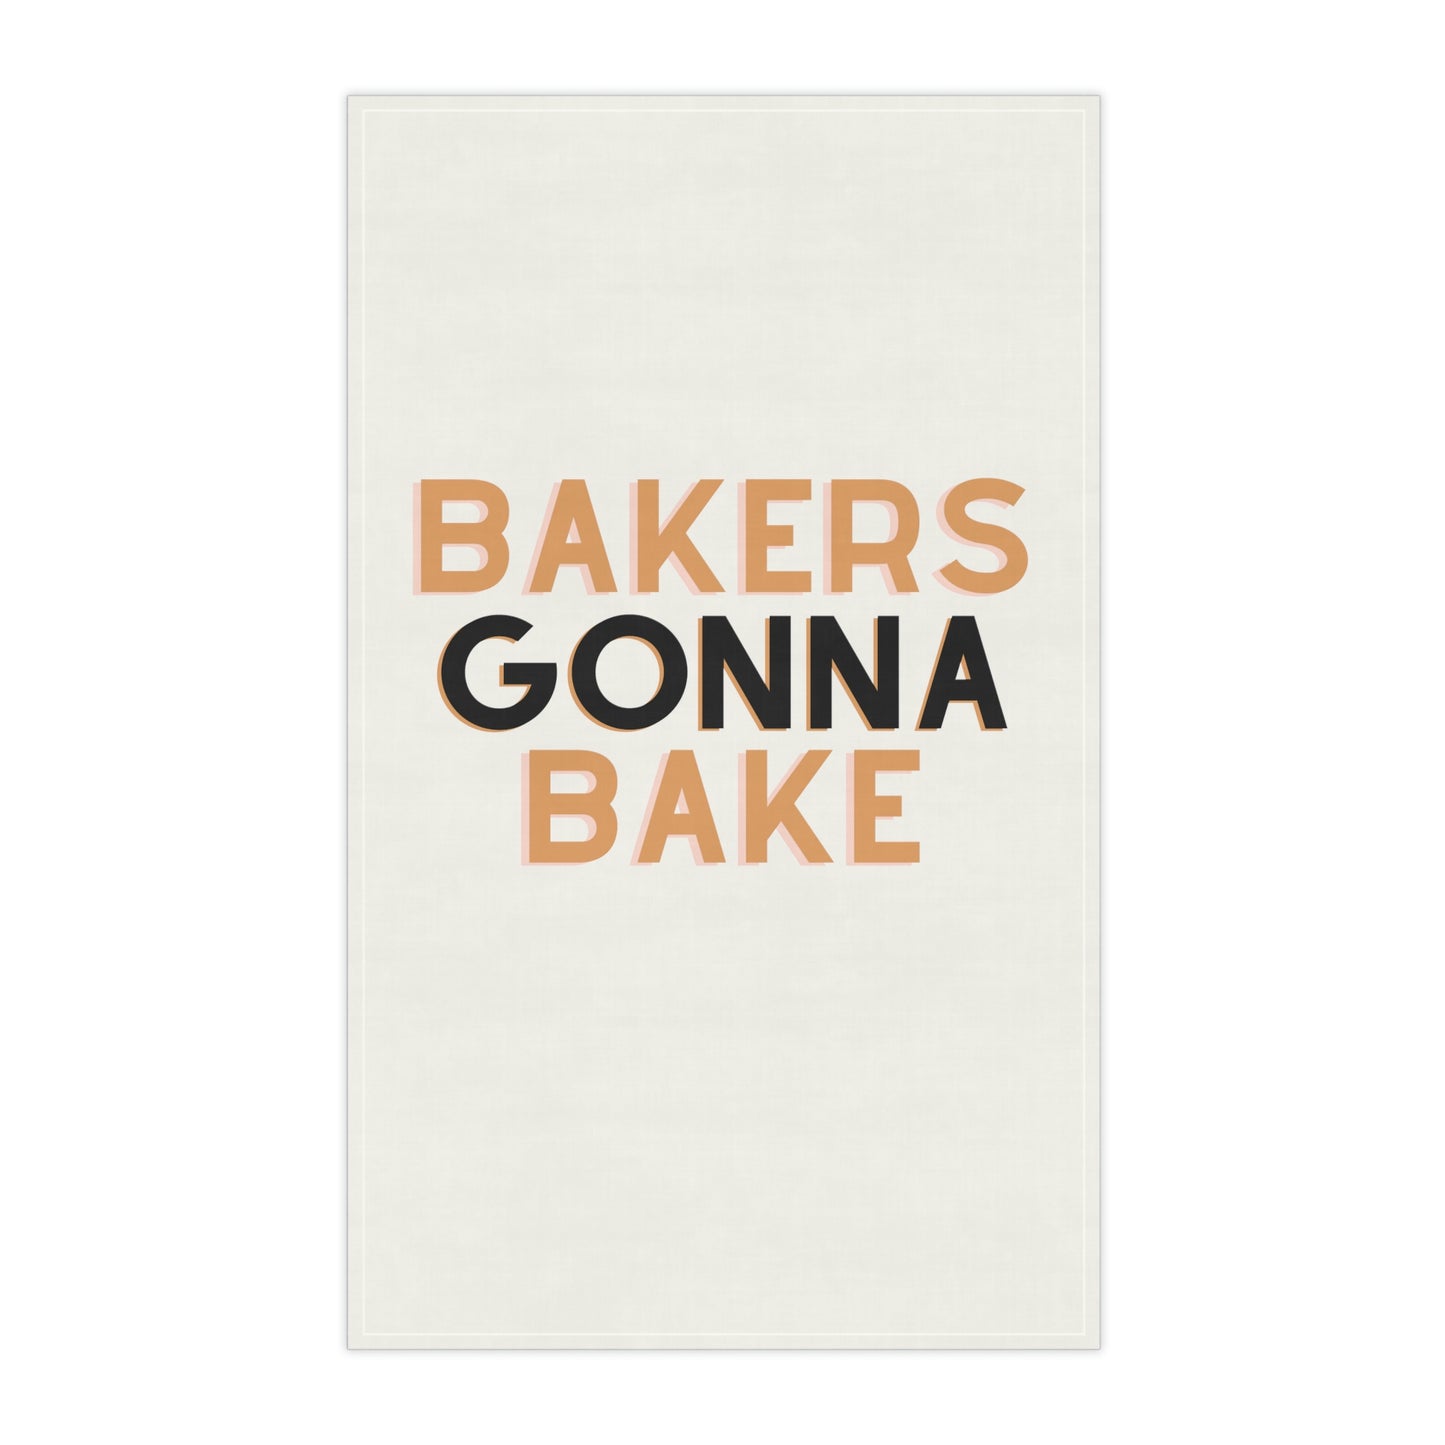 Polyester "Bakers Gonna Bake" kitchen towel displayed in a modern kitchen.